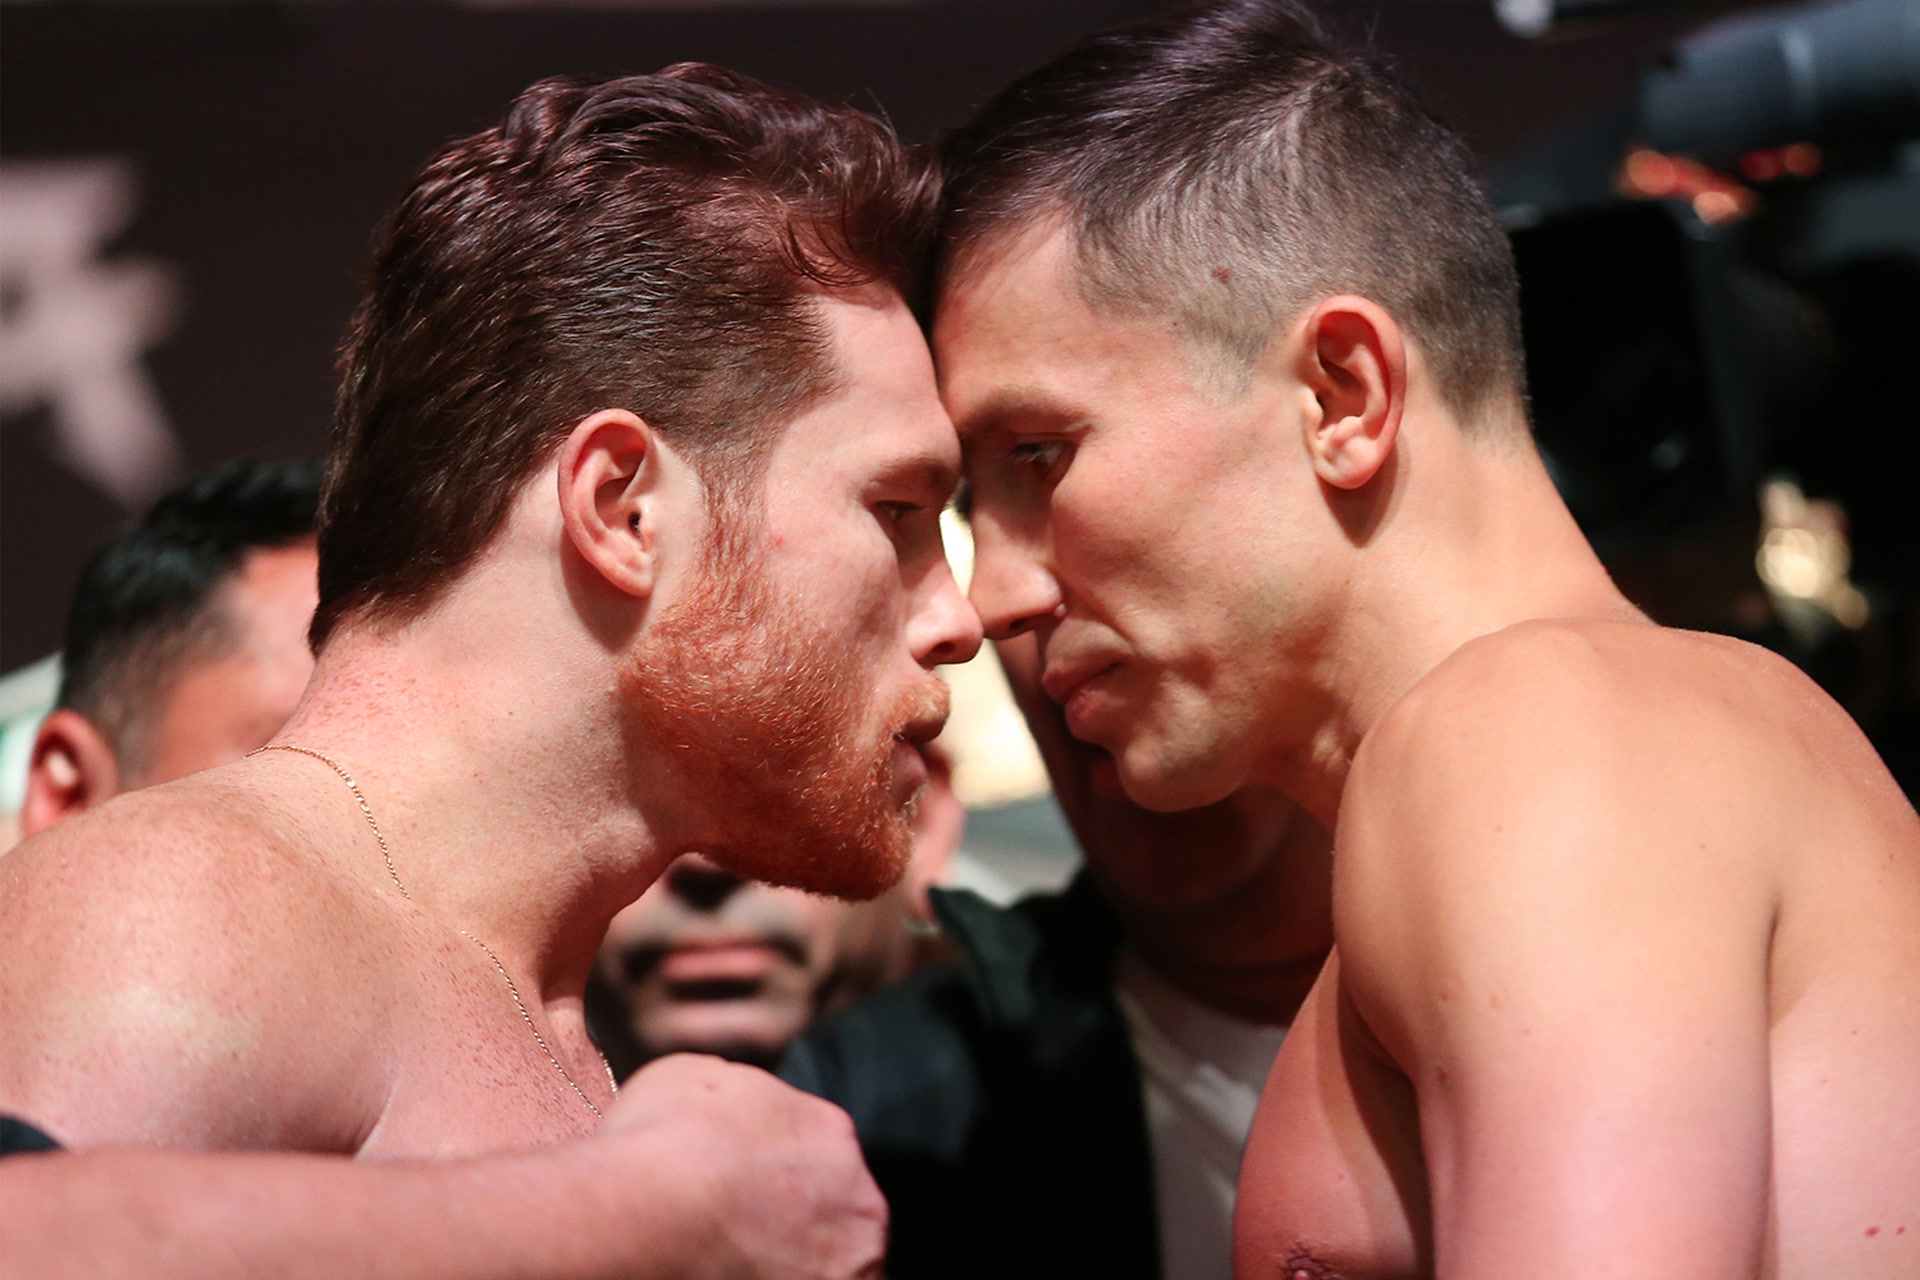 After shoving match, 'Canelo,' GGG ready to settle matters in rin...